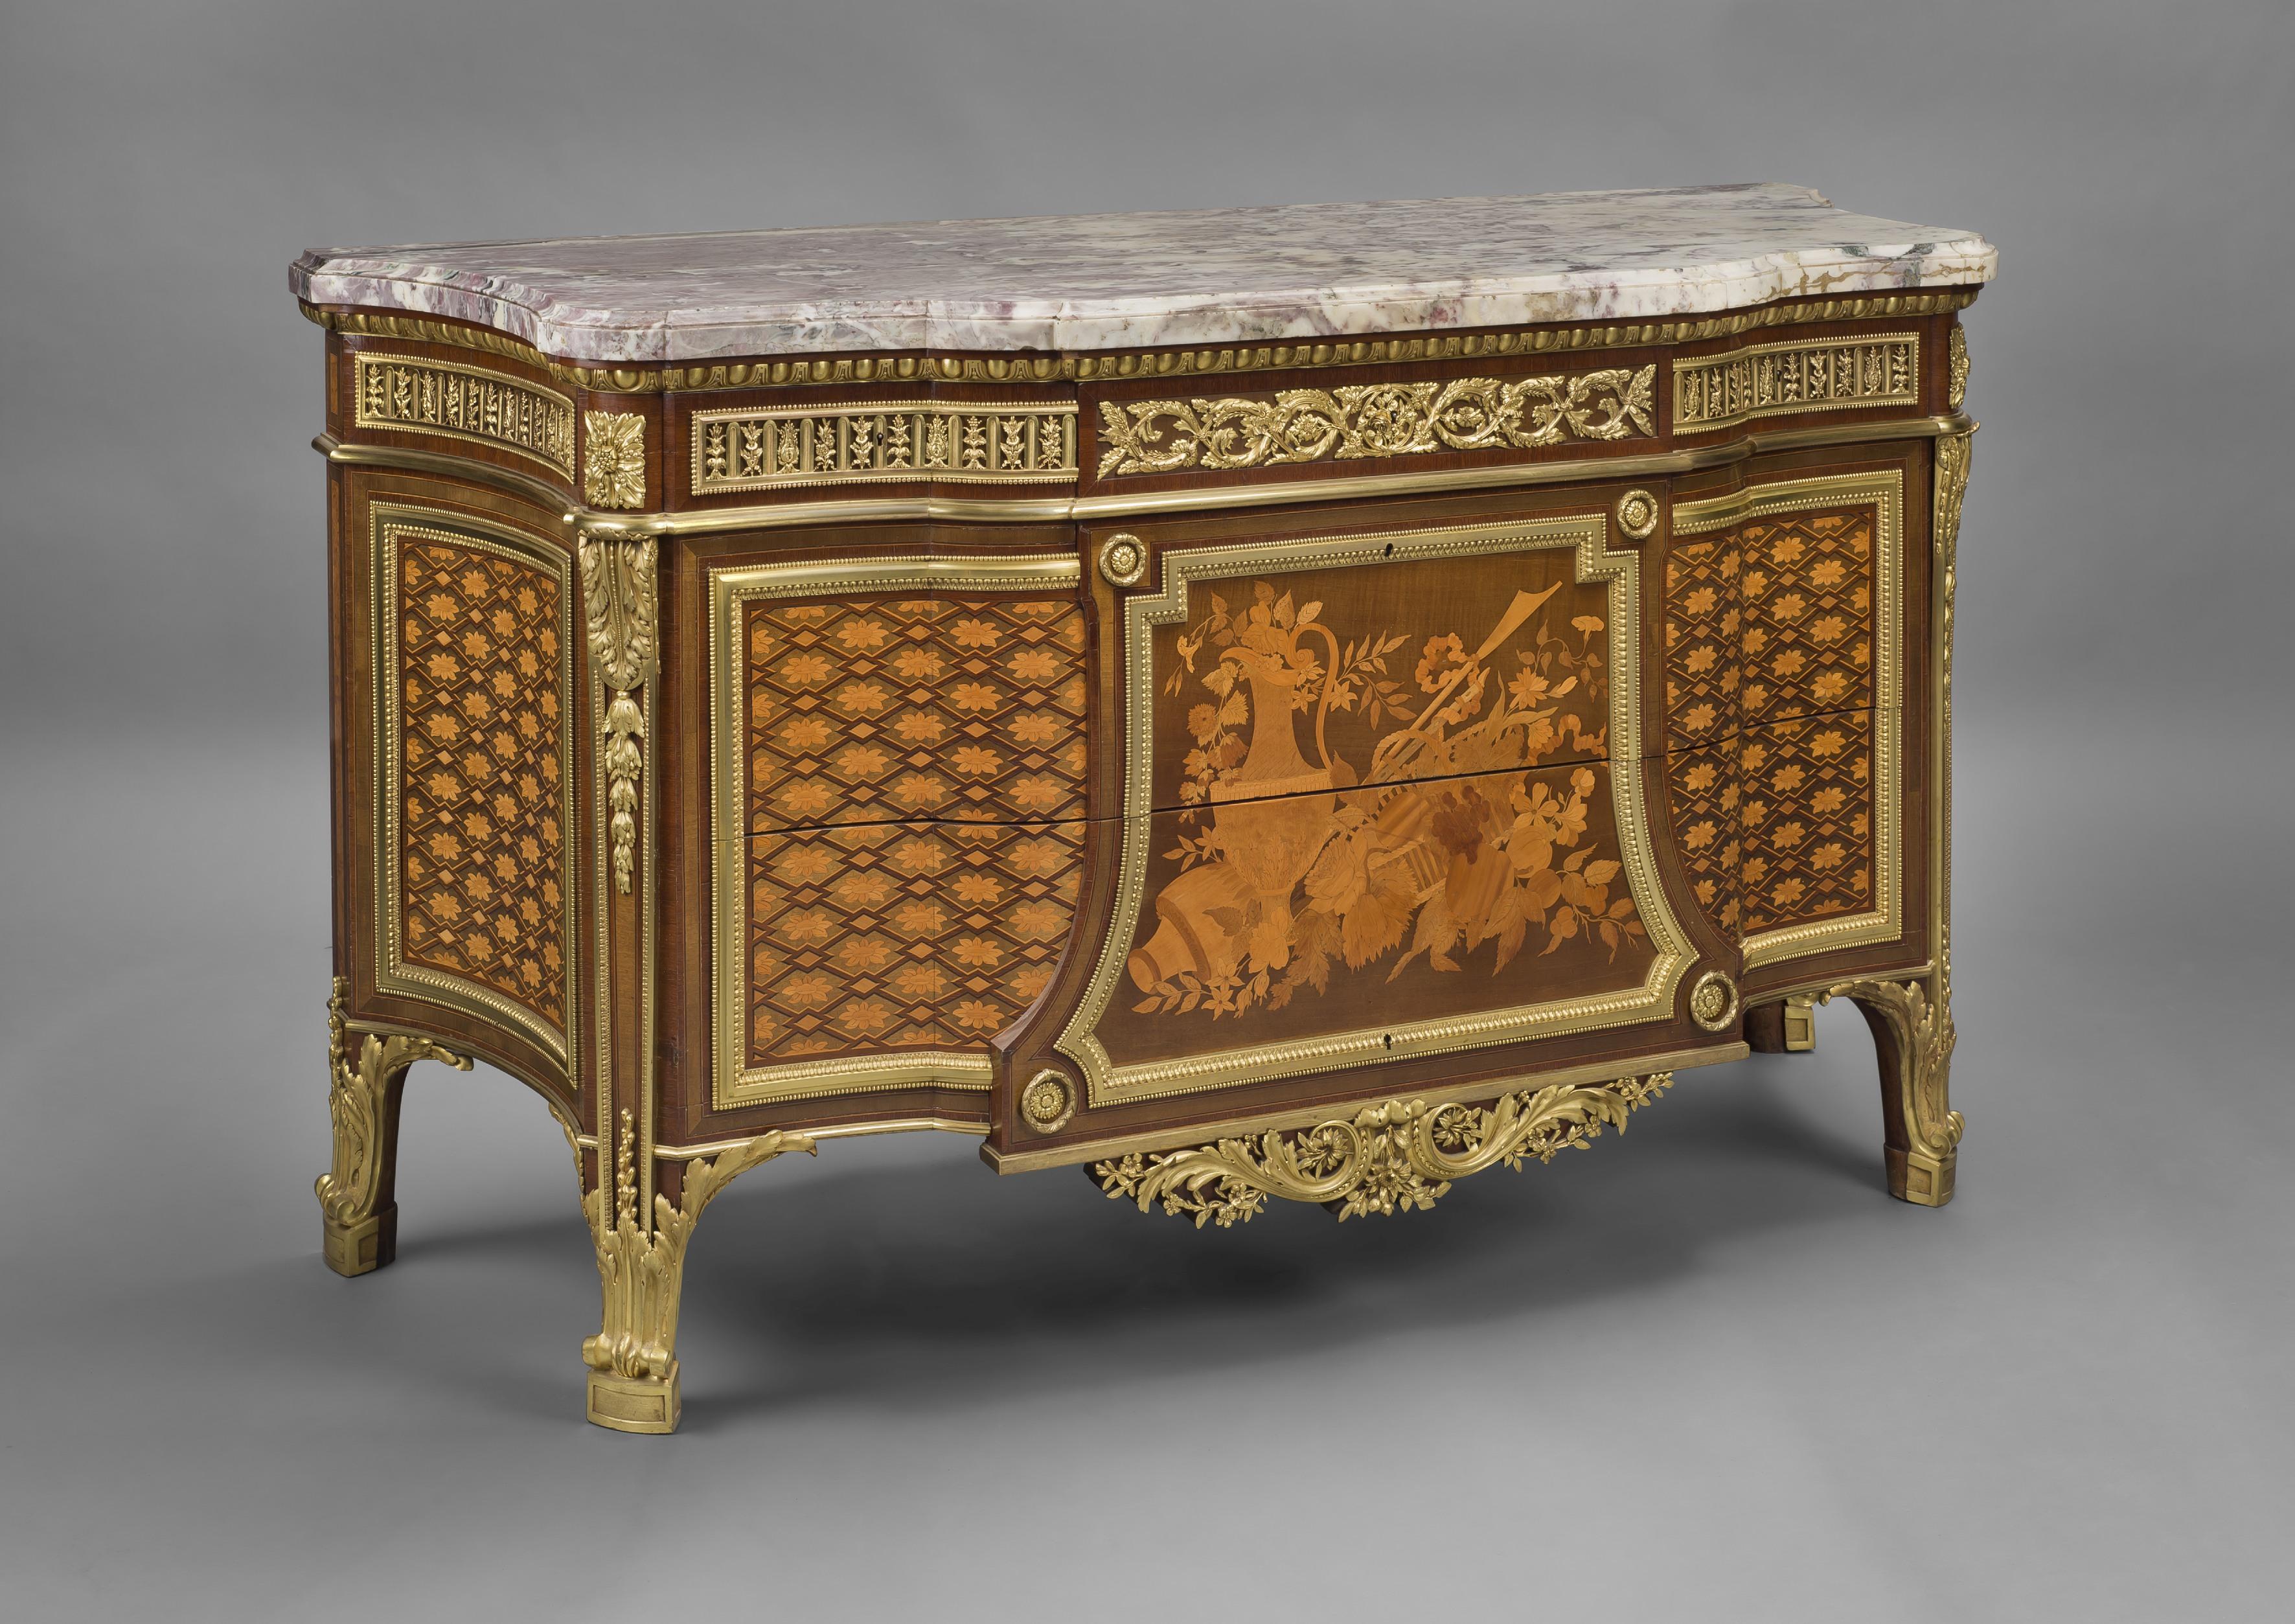 A very fine Louis XVI style gilt bronze-mounted marquetry commode after a model by Jean-Henri Riesener by François Linke.

French, circa 1905. 

Linke Index No. 10. 

Signed 'F. Linke' and the lock-plate stamped 'CT LINKE SERRURERIE/PARIS'.